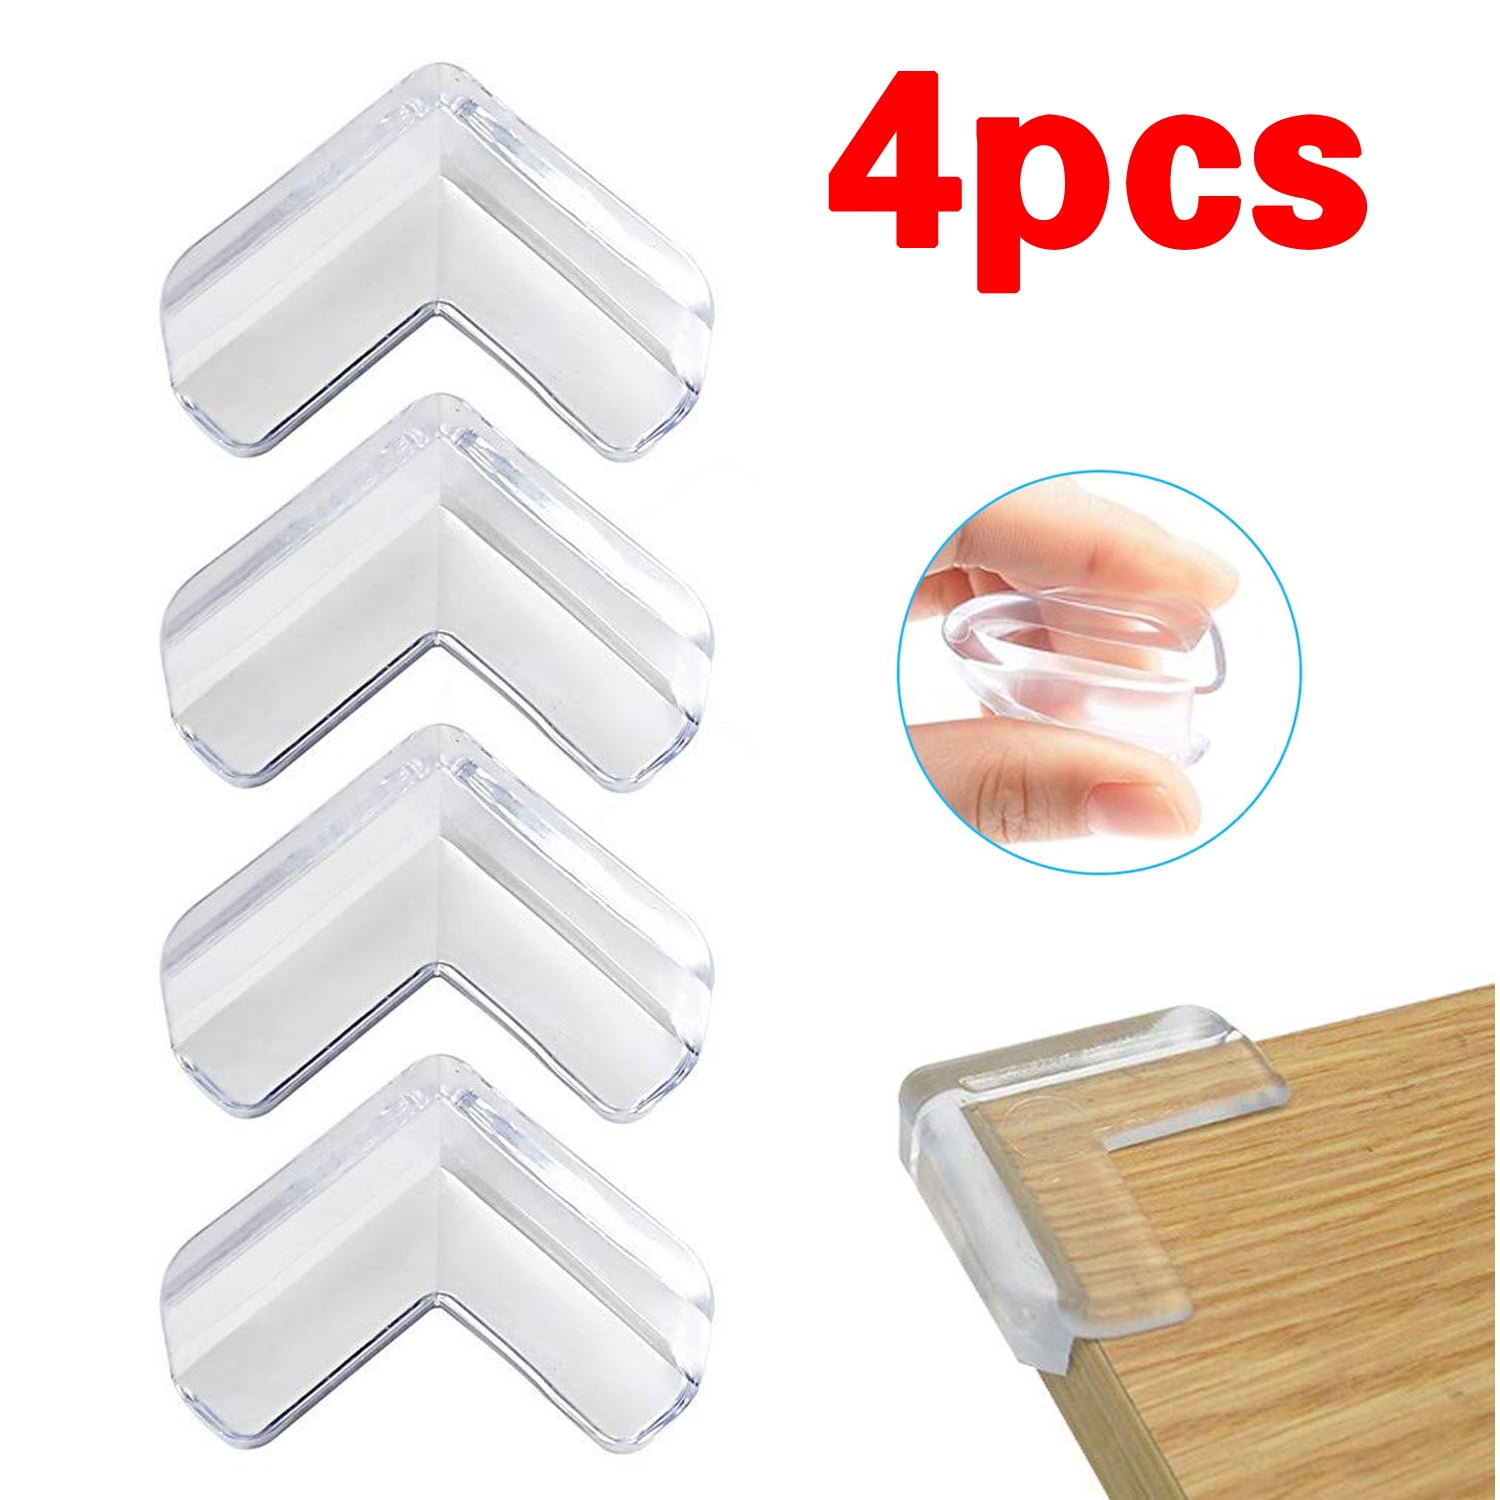 4pcs Child Baby Safety Colorful Protector Strip Soft Edge Table Corners  Protection Guards Cover Toddler Infant Anticollision